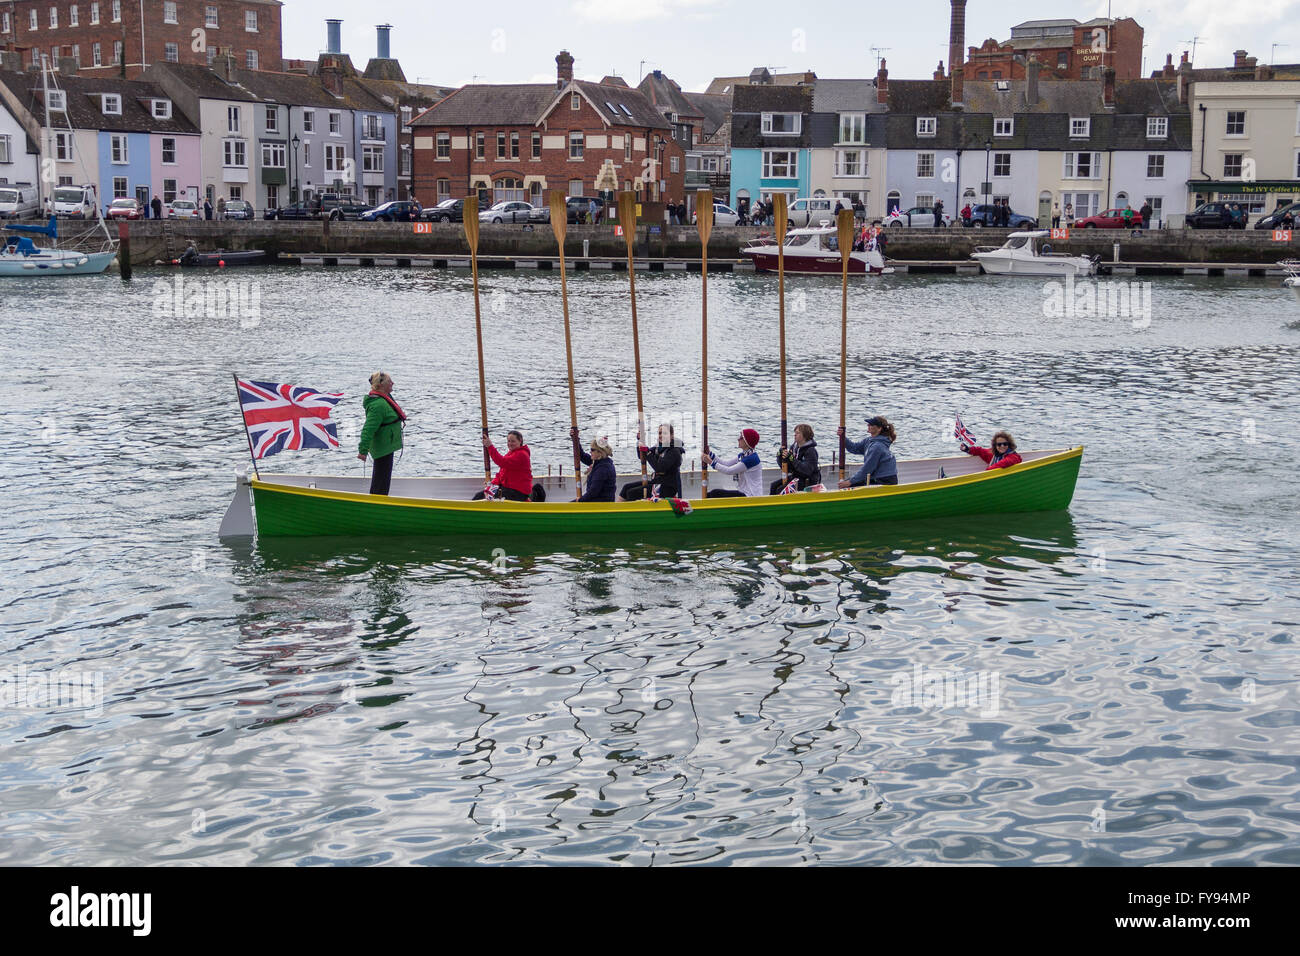 Weymouth, England. 23 April 2016. Queen's 90th Birthday Floating Tribute. Rowing boat, rowers saluting. Credit:  Frances Underwood/Alamy Live News Stock Photo